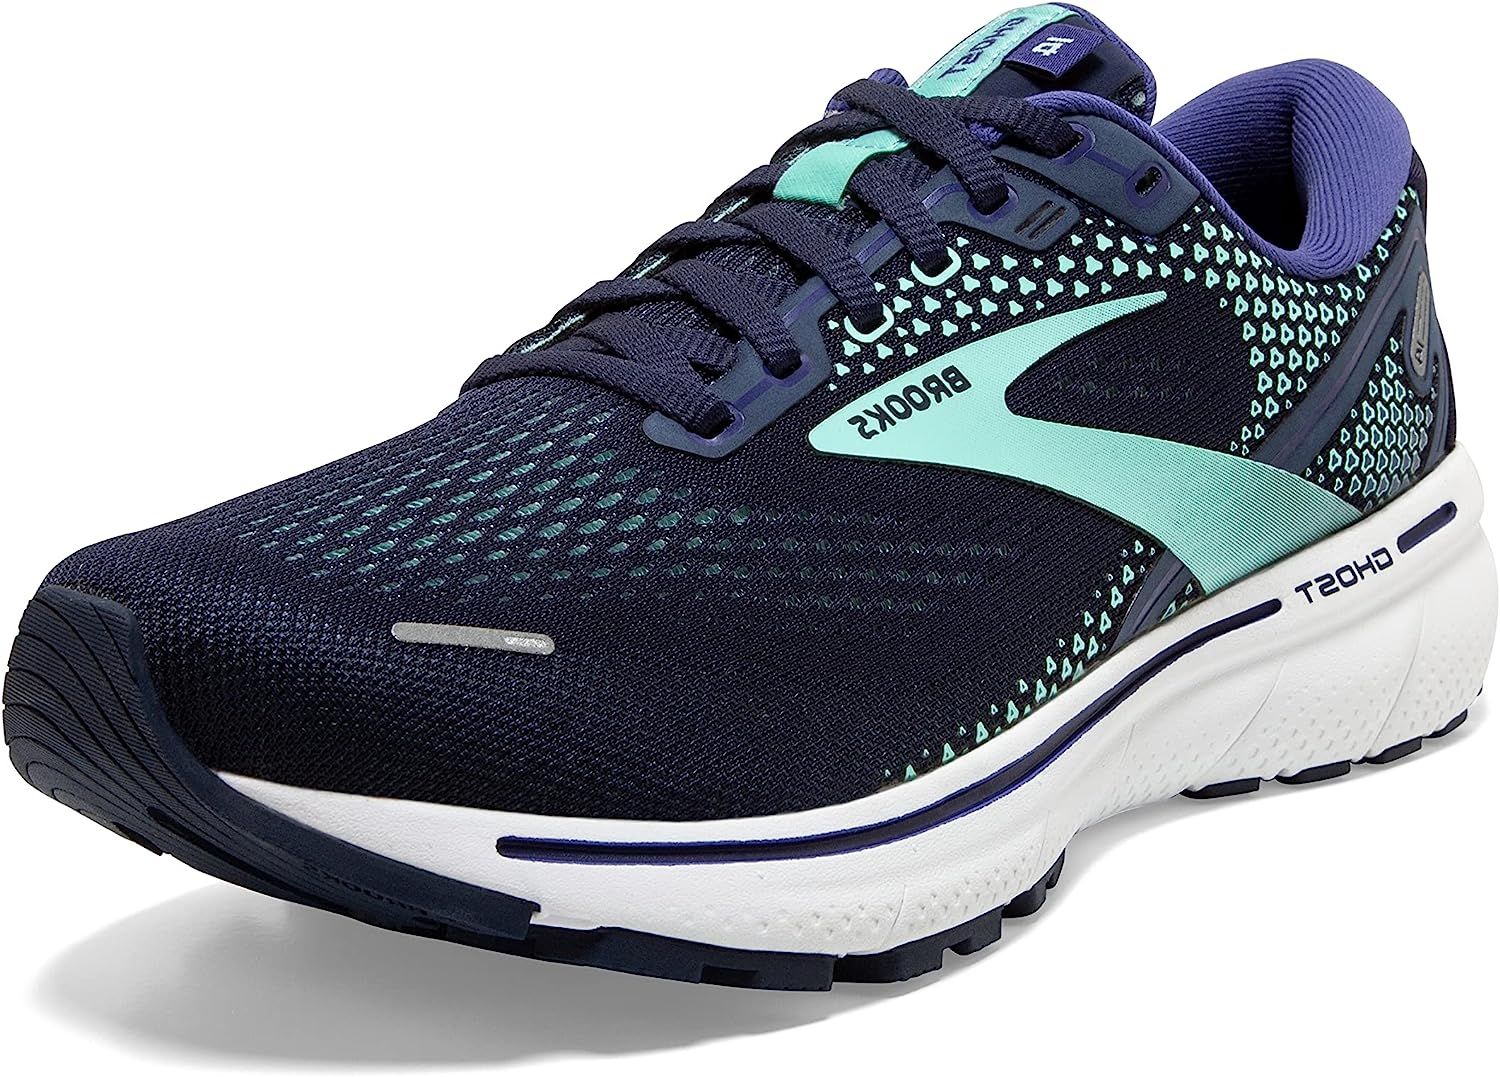 running shoes for walking review